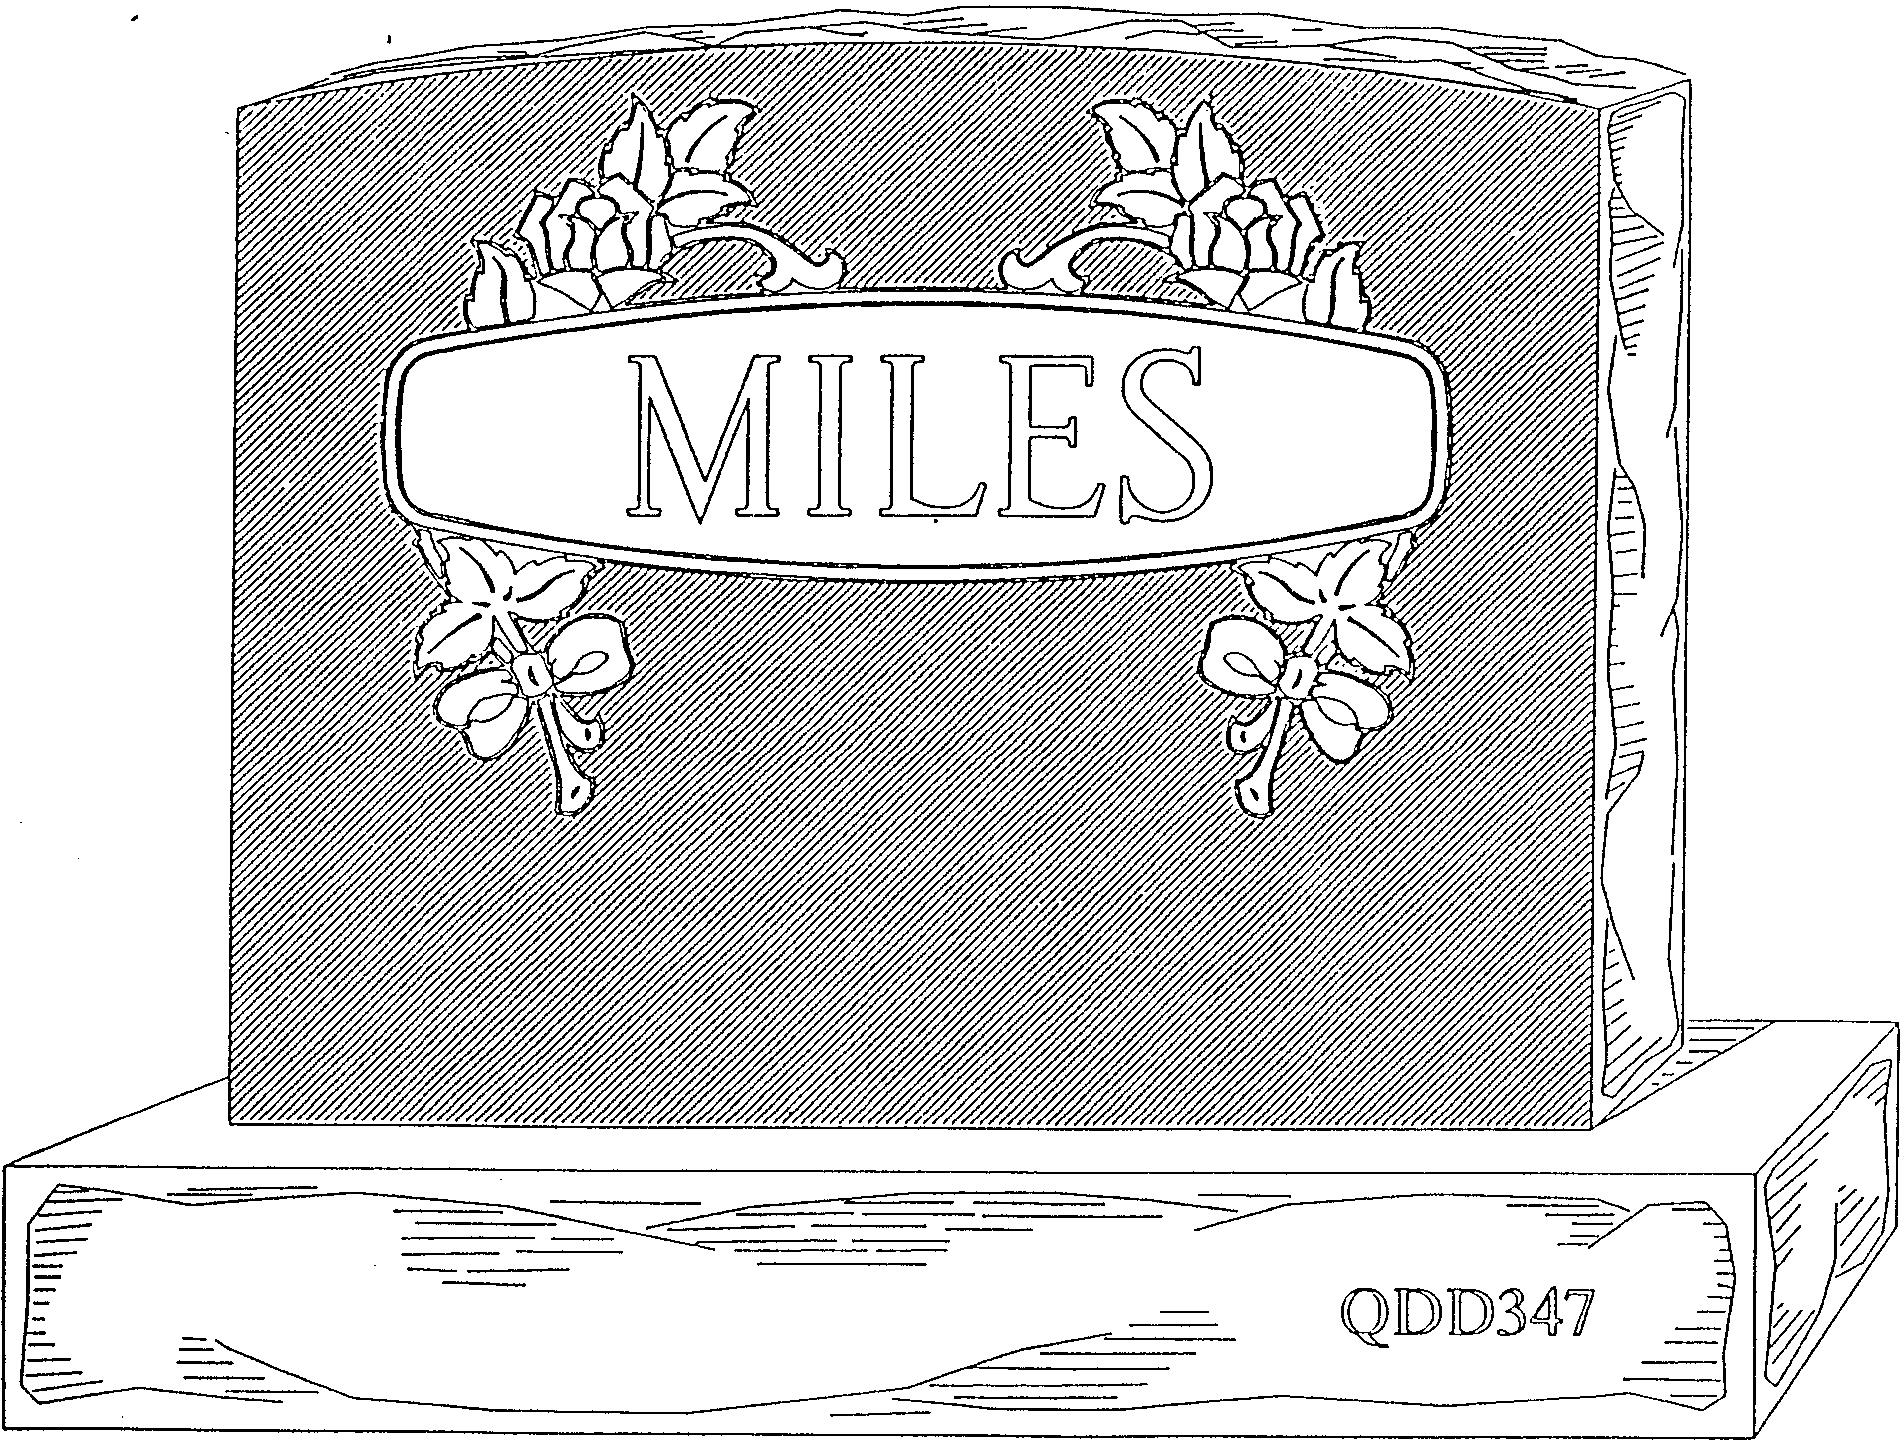 a black and white drawing of a gravestone for miles .